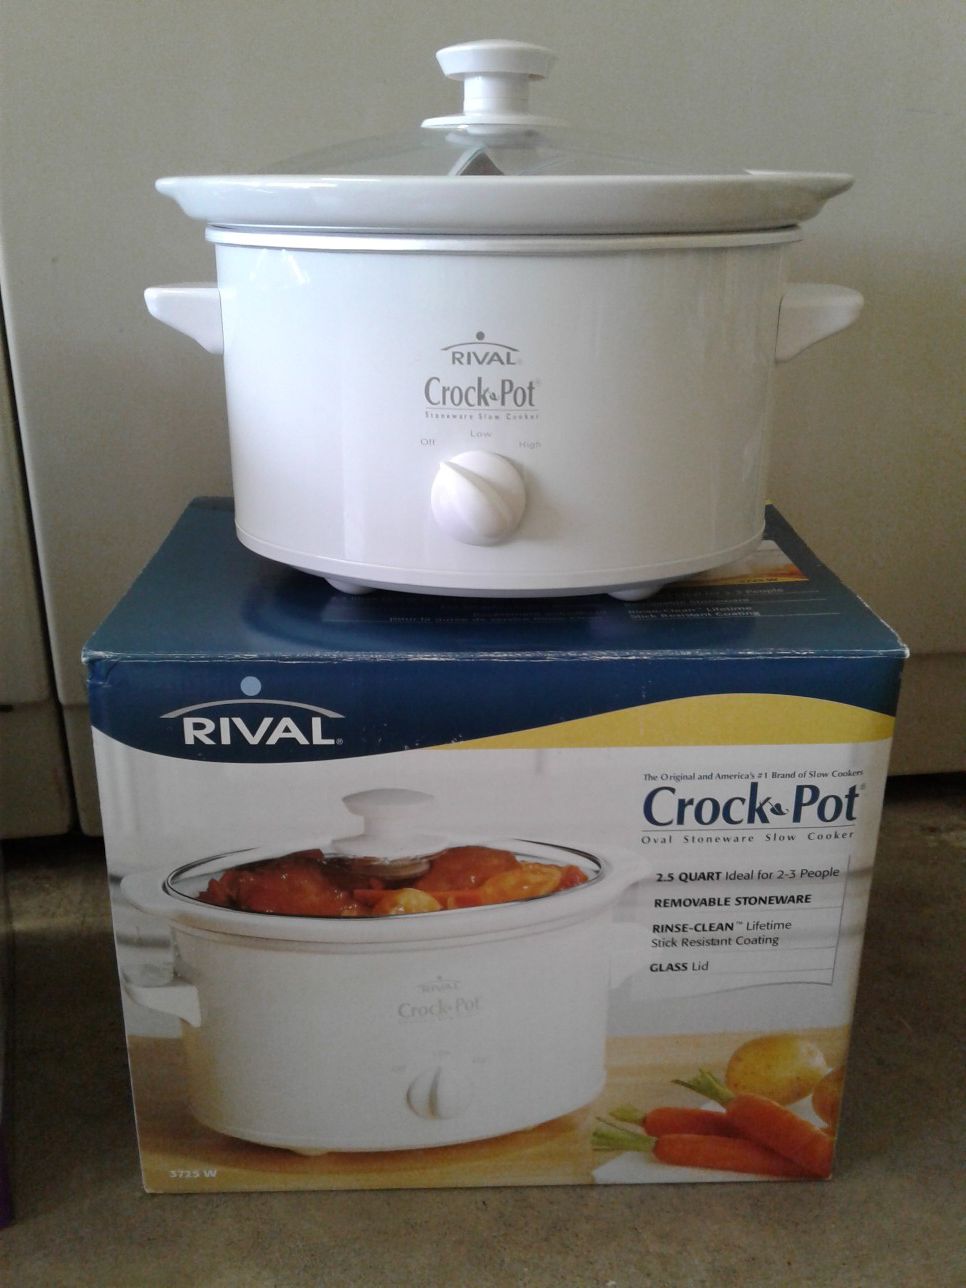 Bella Linea Collection 5QT Programmable Slow Cooker for Sale in Sunrise, FL  - OfferUp